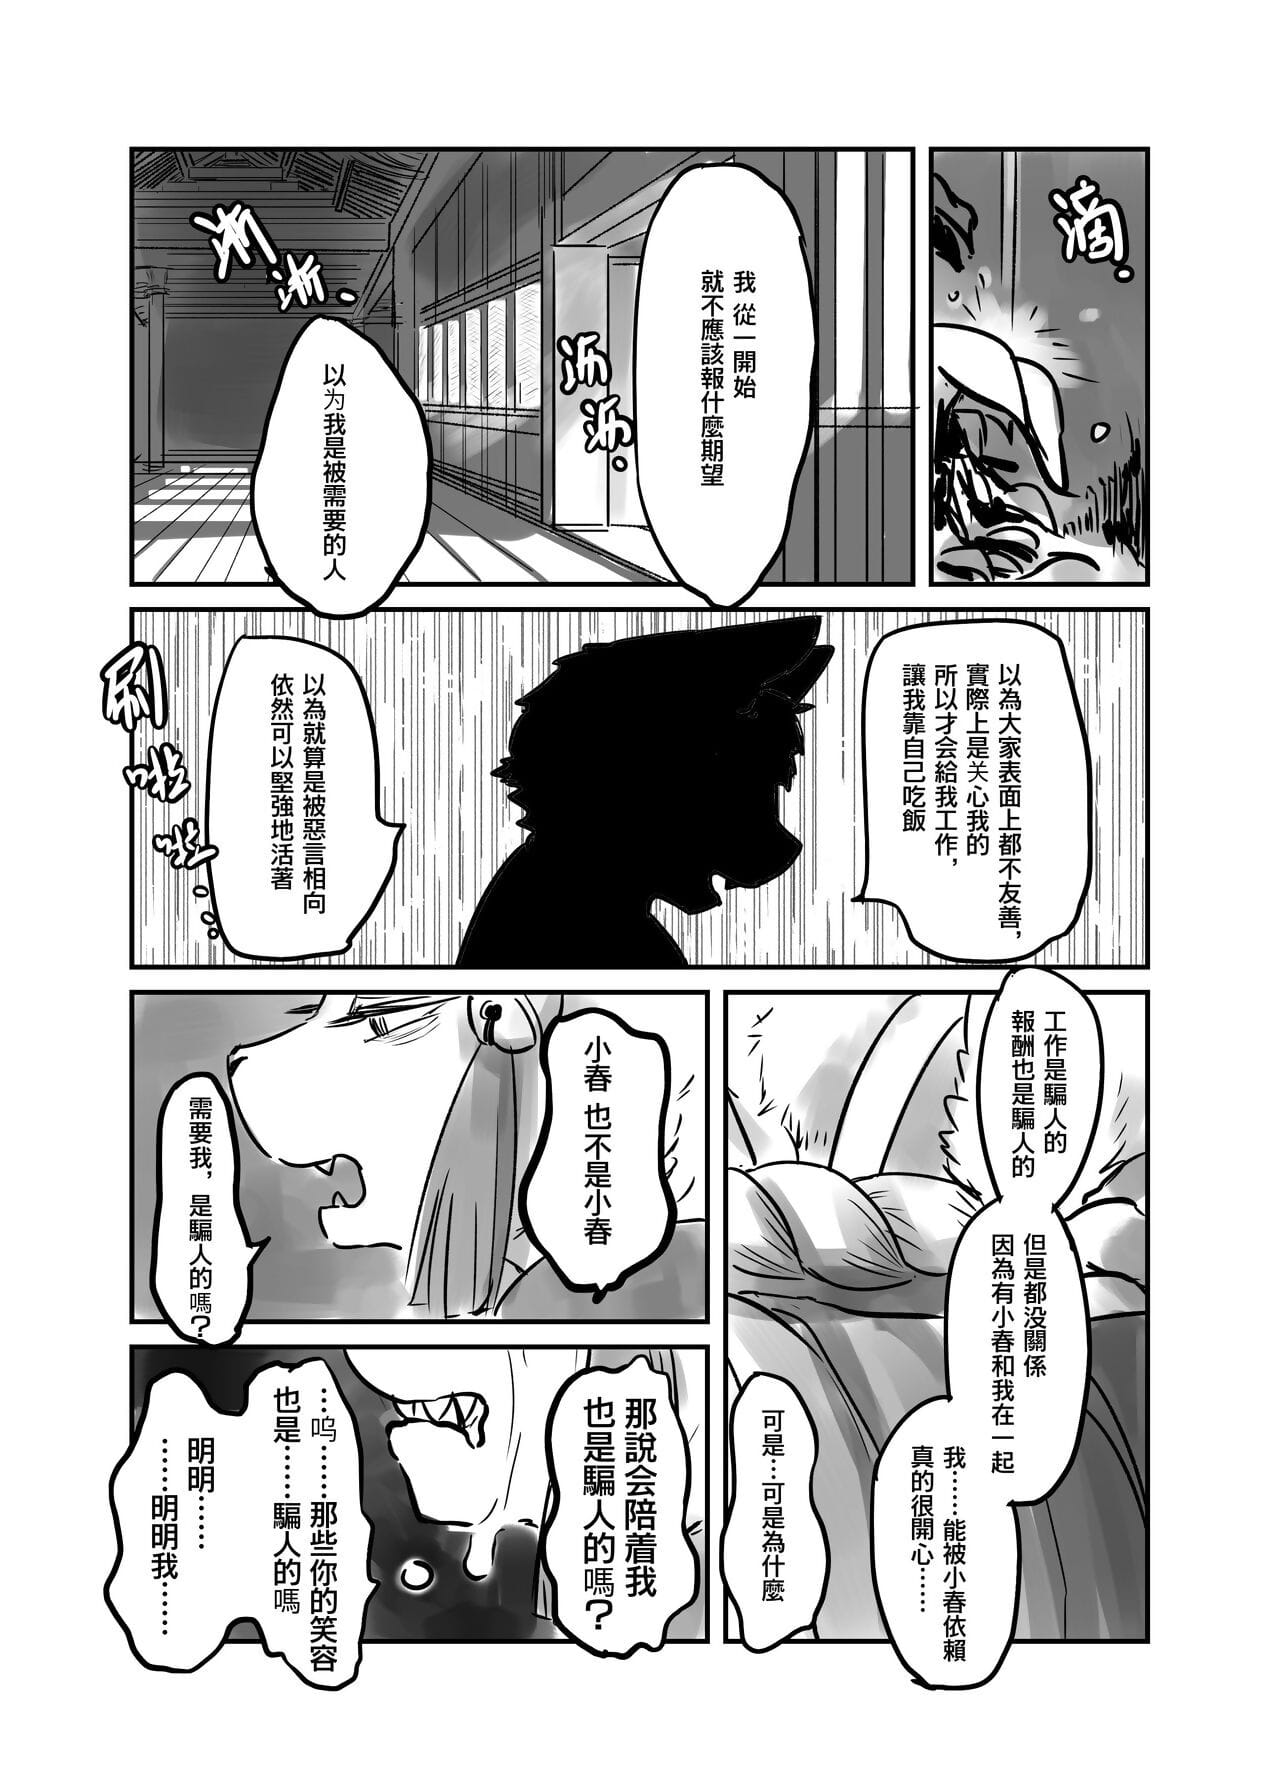 （the visitatore 他乡之人 by：鬼流 parte 3 page 1